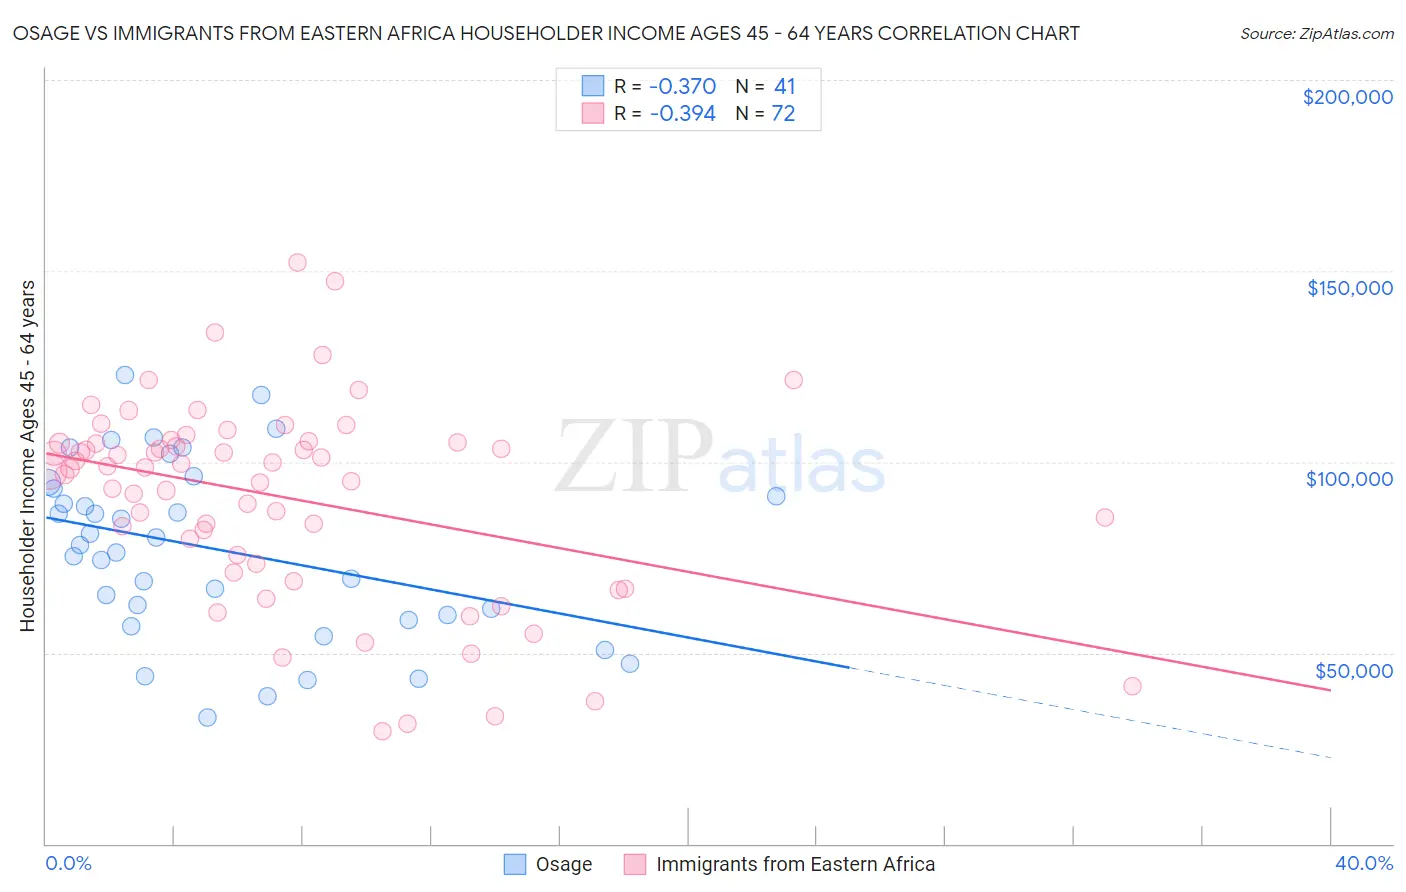 Osage vs Immigrants from Eastern Africa Householder Income Ages 45 - 64 years